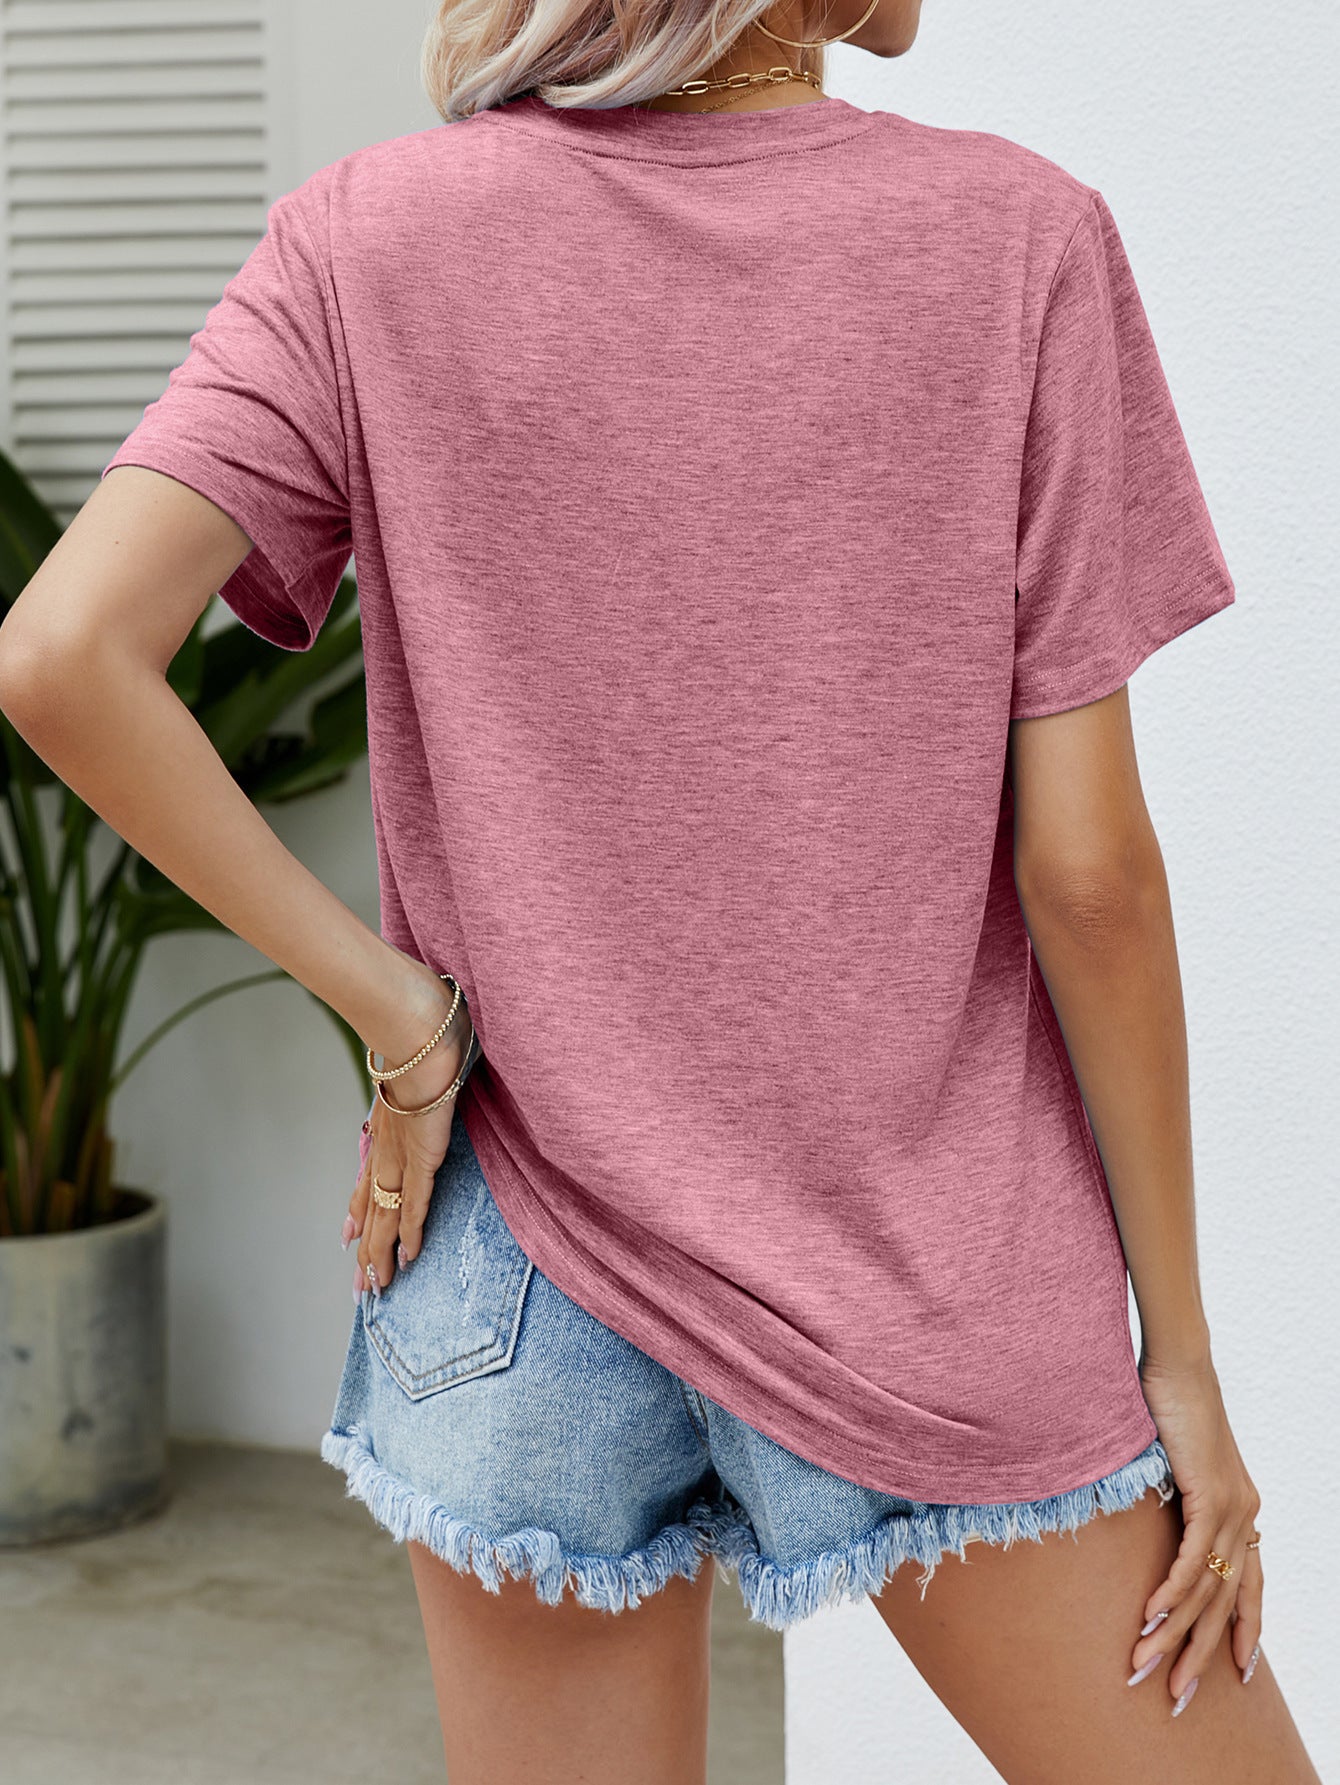 Summer Casual Round Neck Short Sleeves Printed T-shirt Top For Women